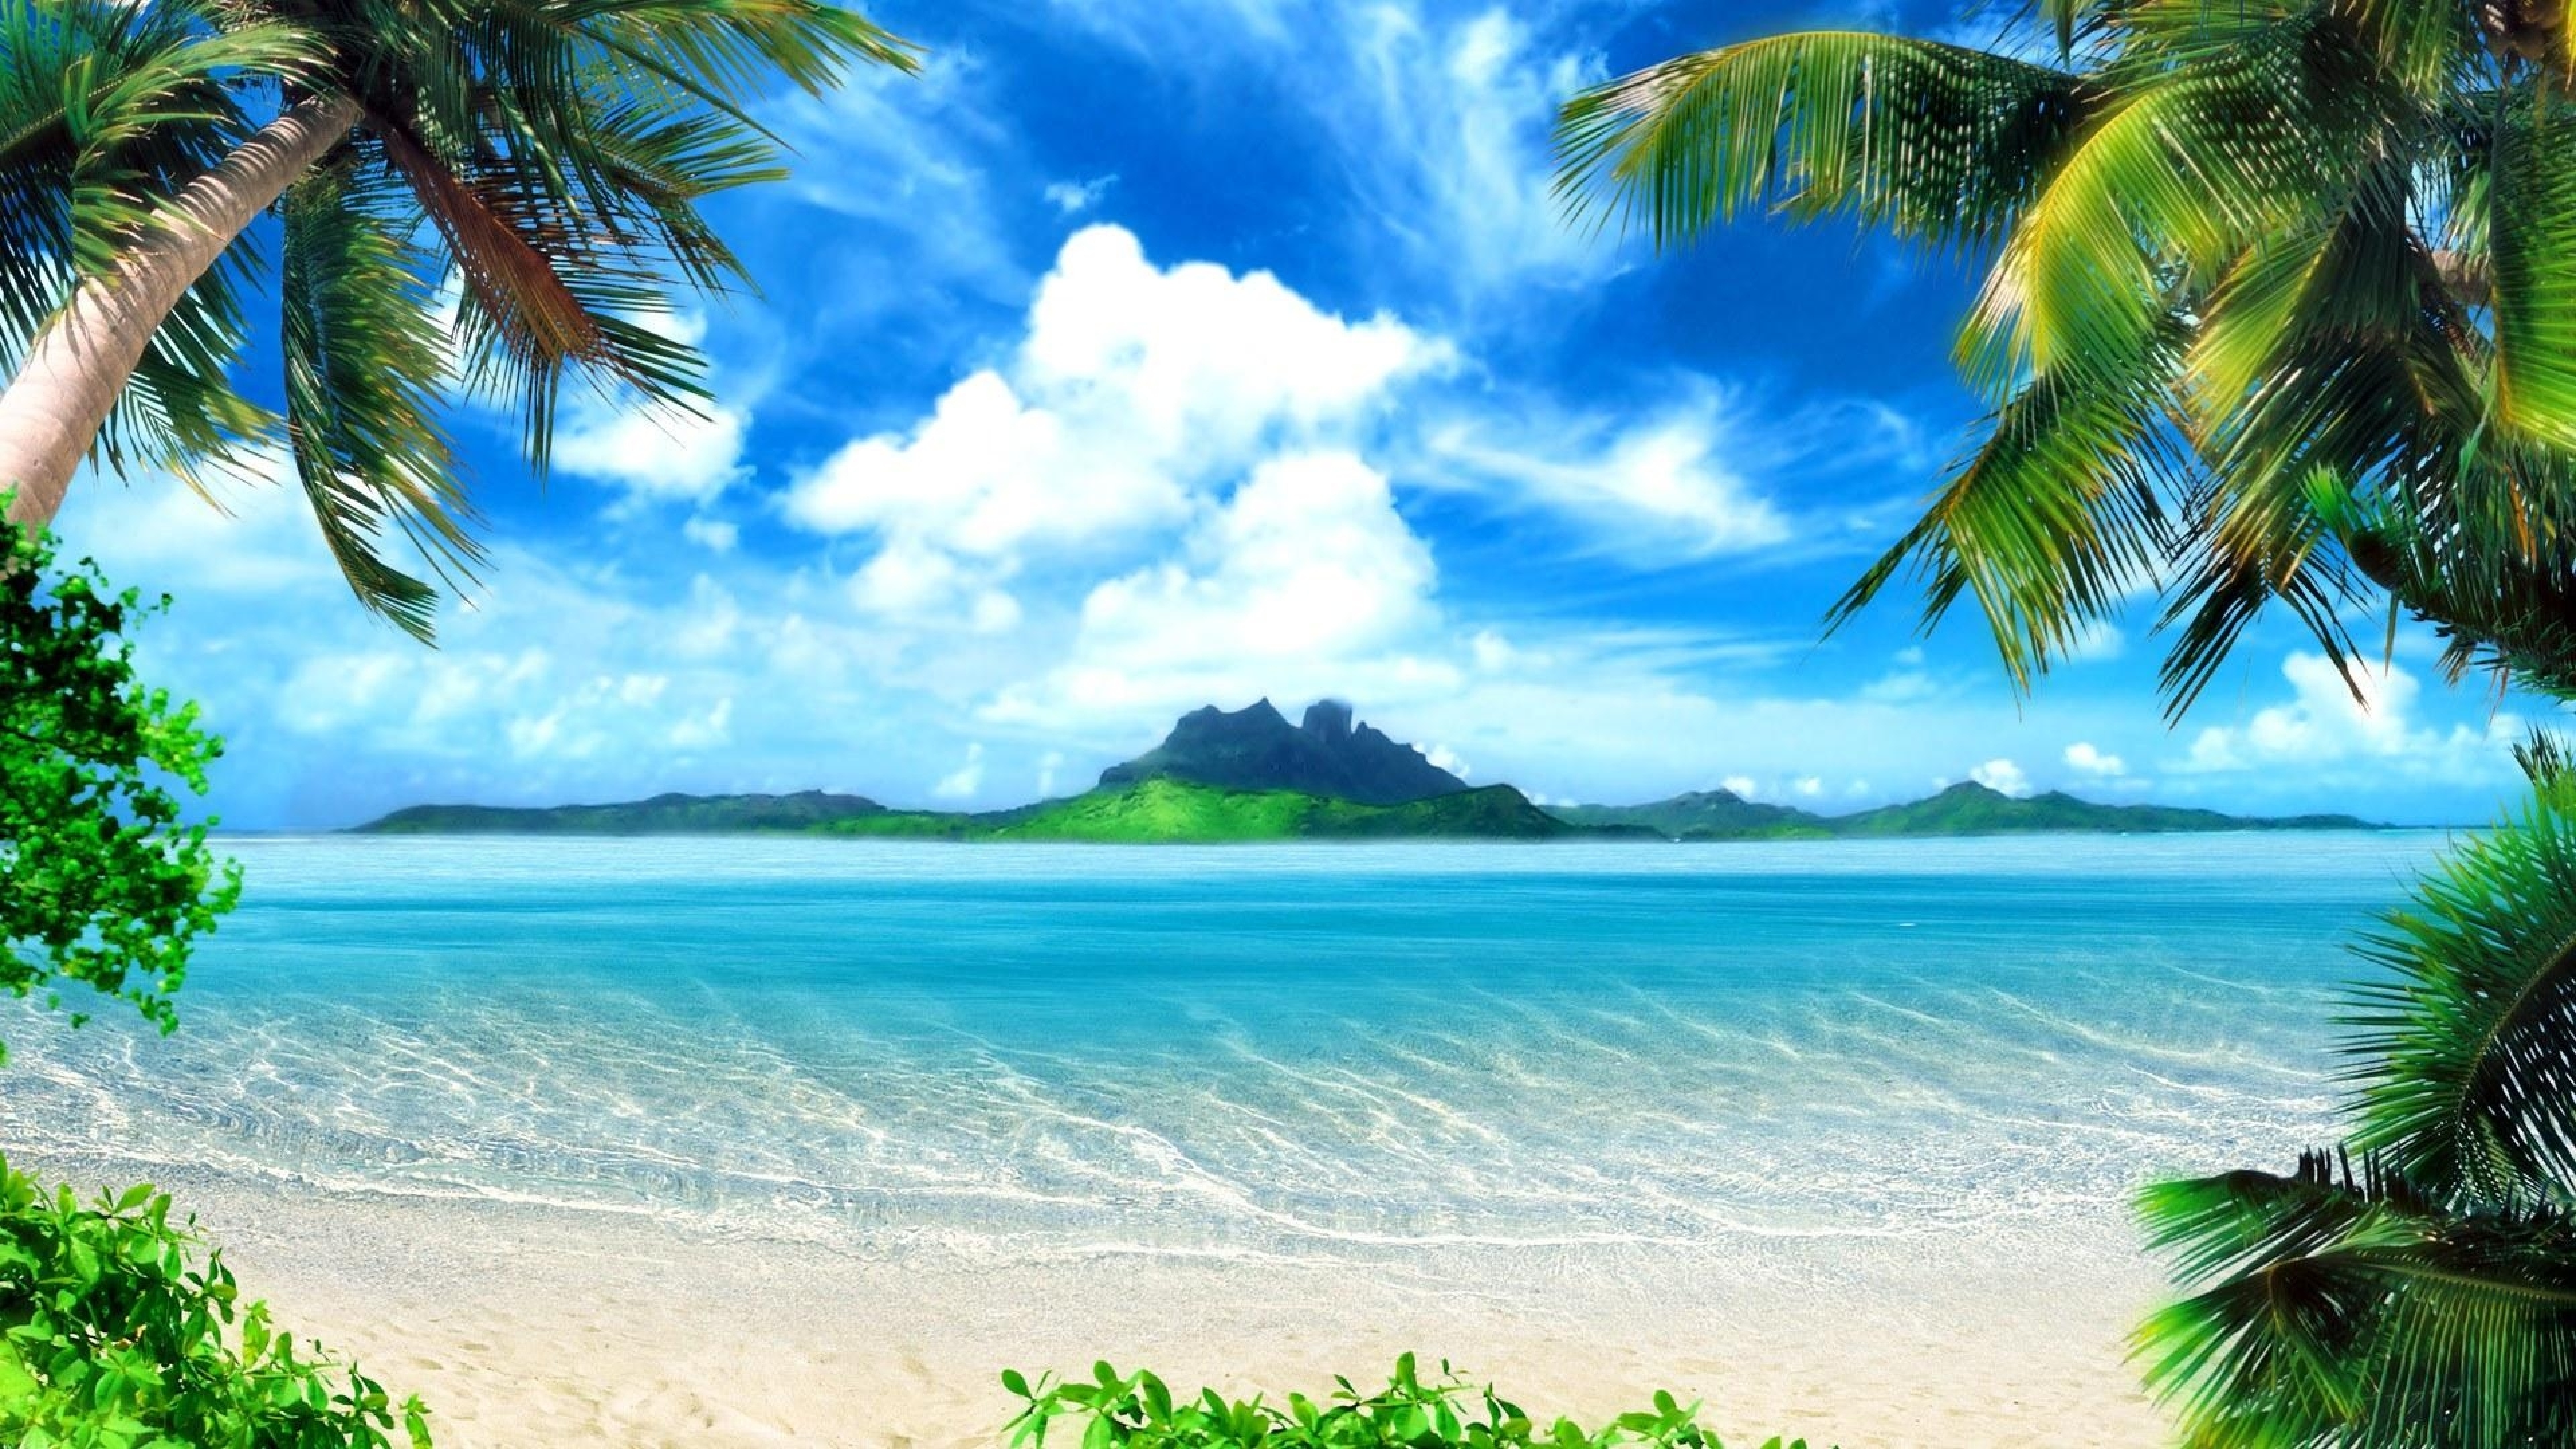 10 Greatest 4k desktop wallpaper beach You Can Download It For Free ...